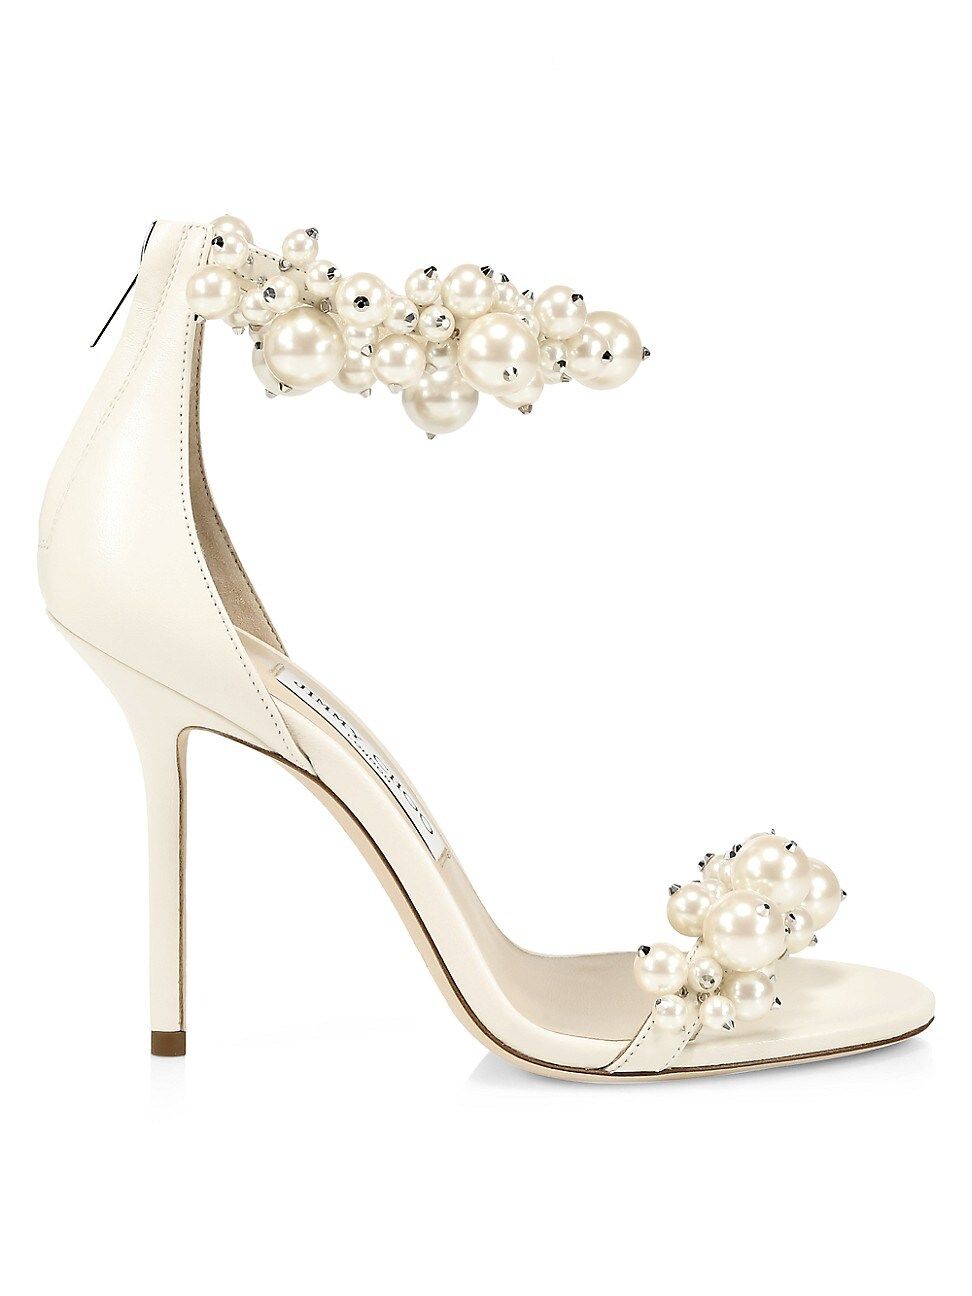 Jimmy Choo Women's Maisel Faux Pearl-Embellished Leather Sandals - Beige Natural - Size 11 | Saks Fifth Avenue